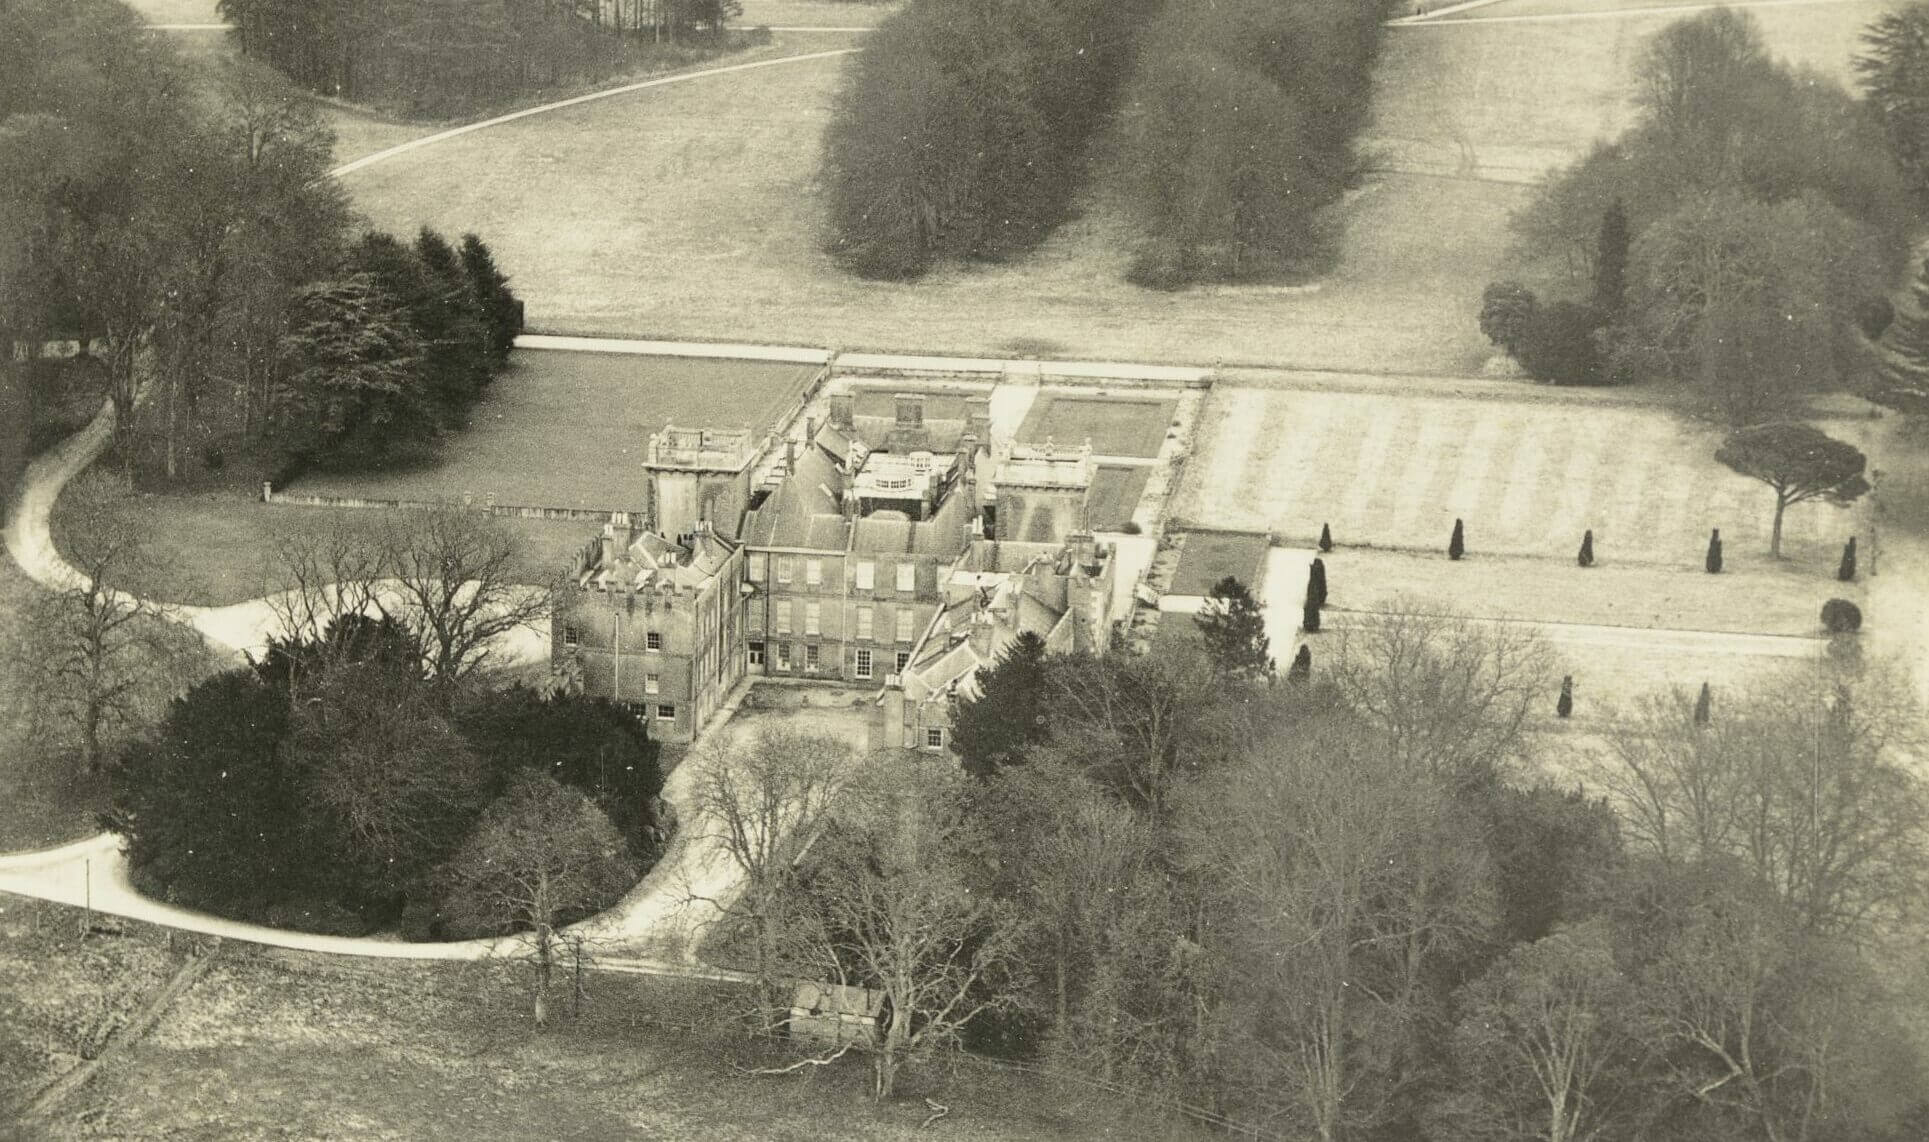 St Giles House Aerial View Header Image History